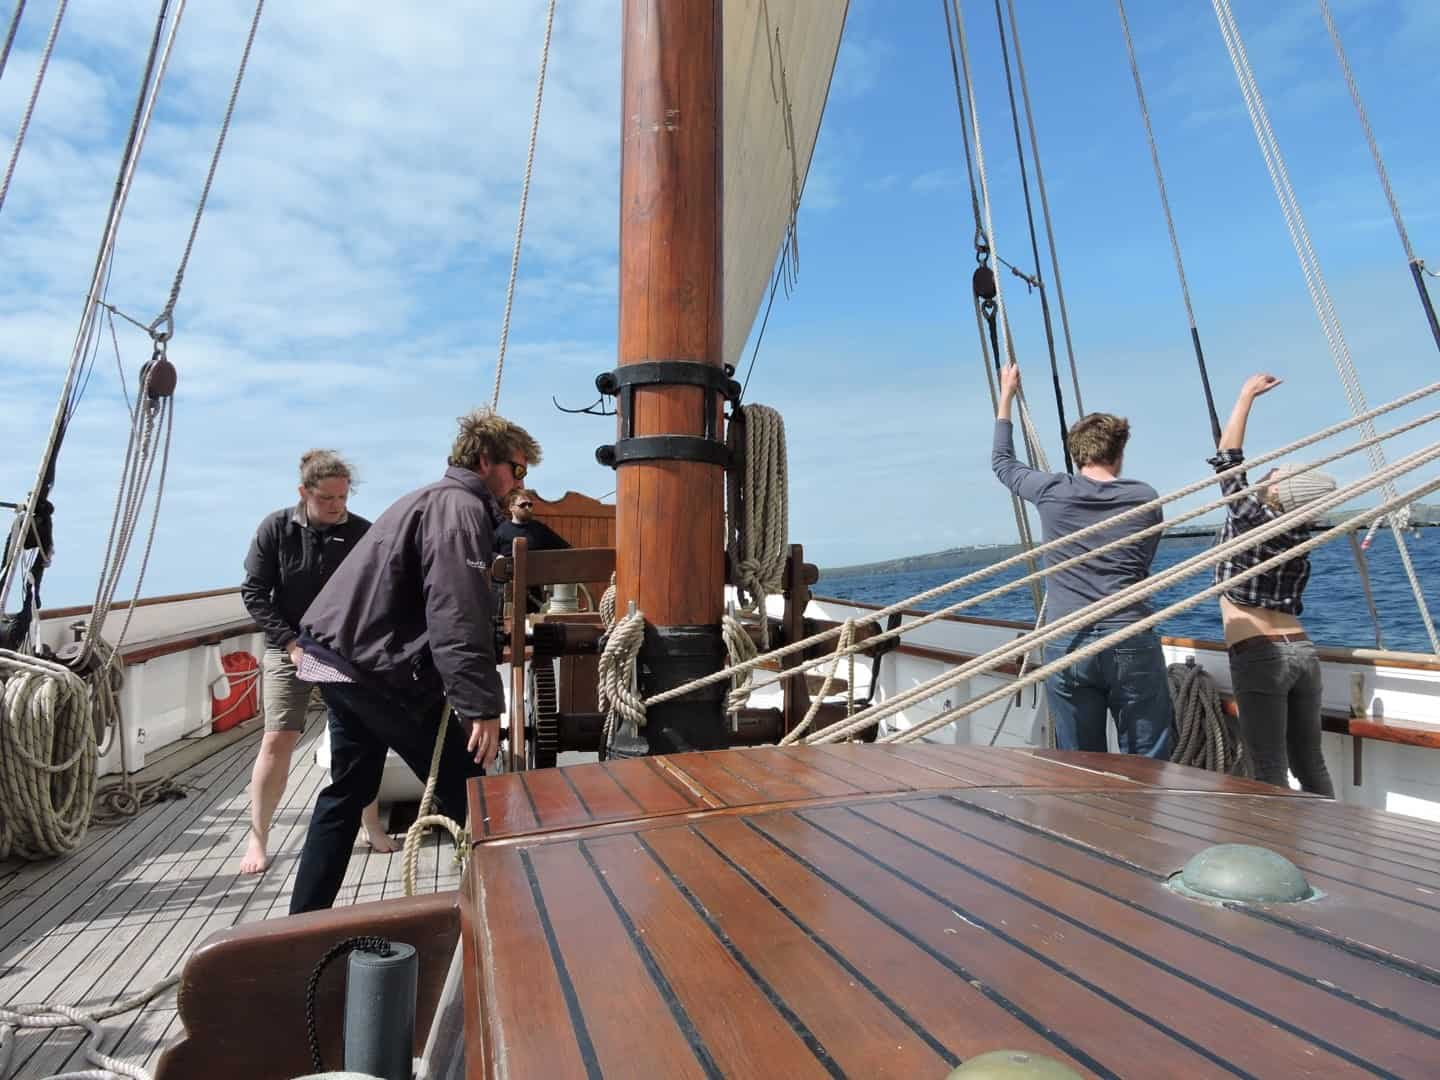 Adventure afloat and Explore Ashore with Classic Sailing in the Isles of Scilly